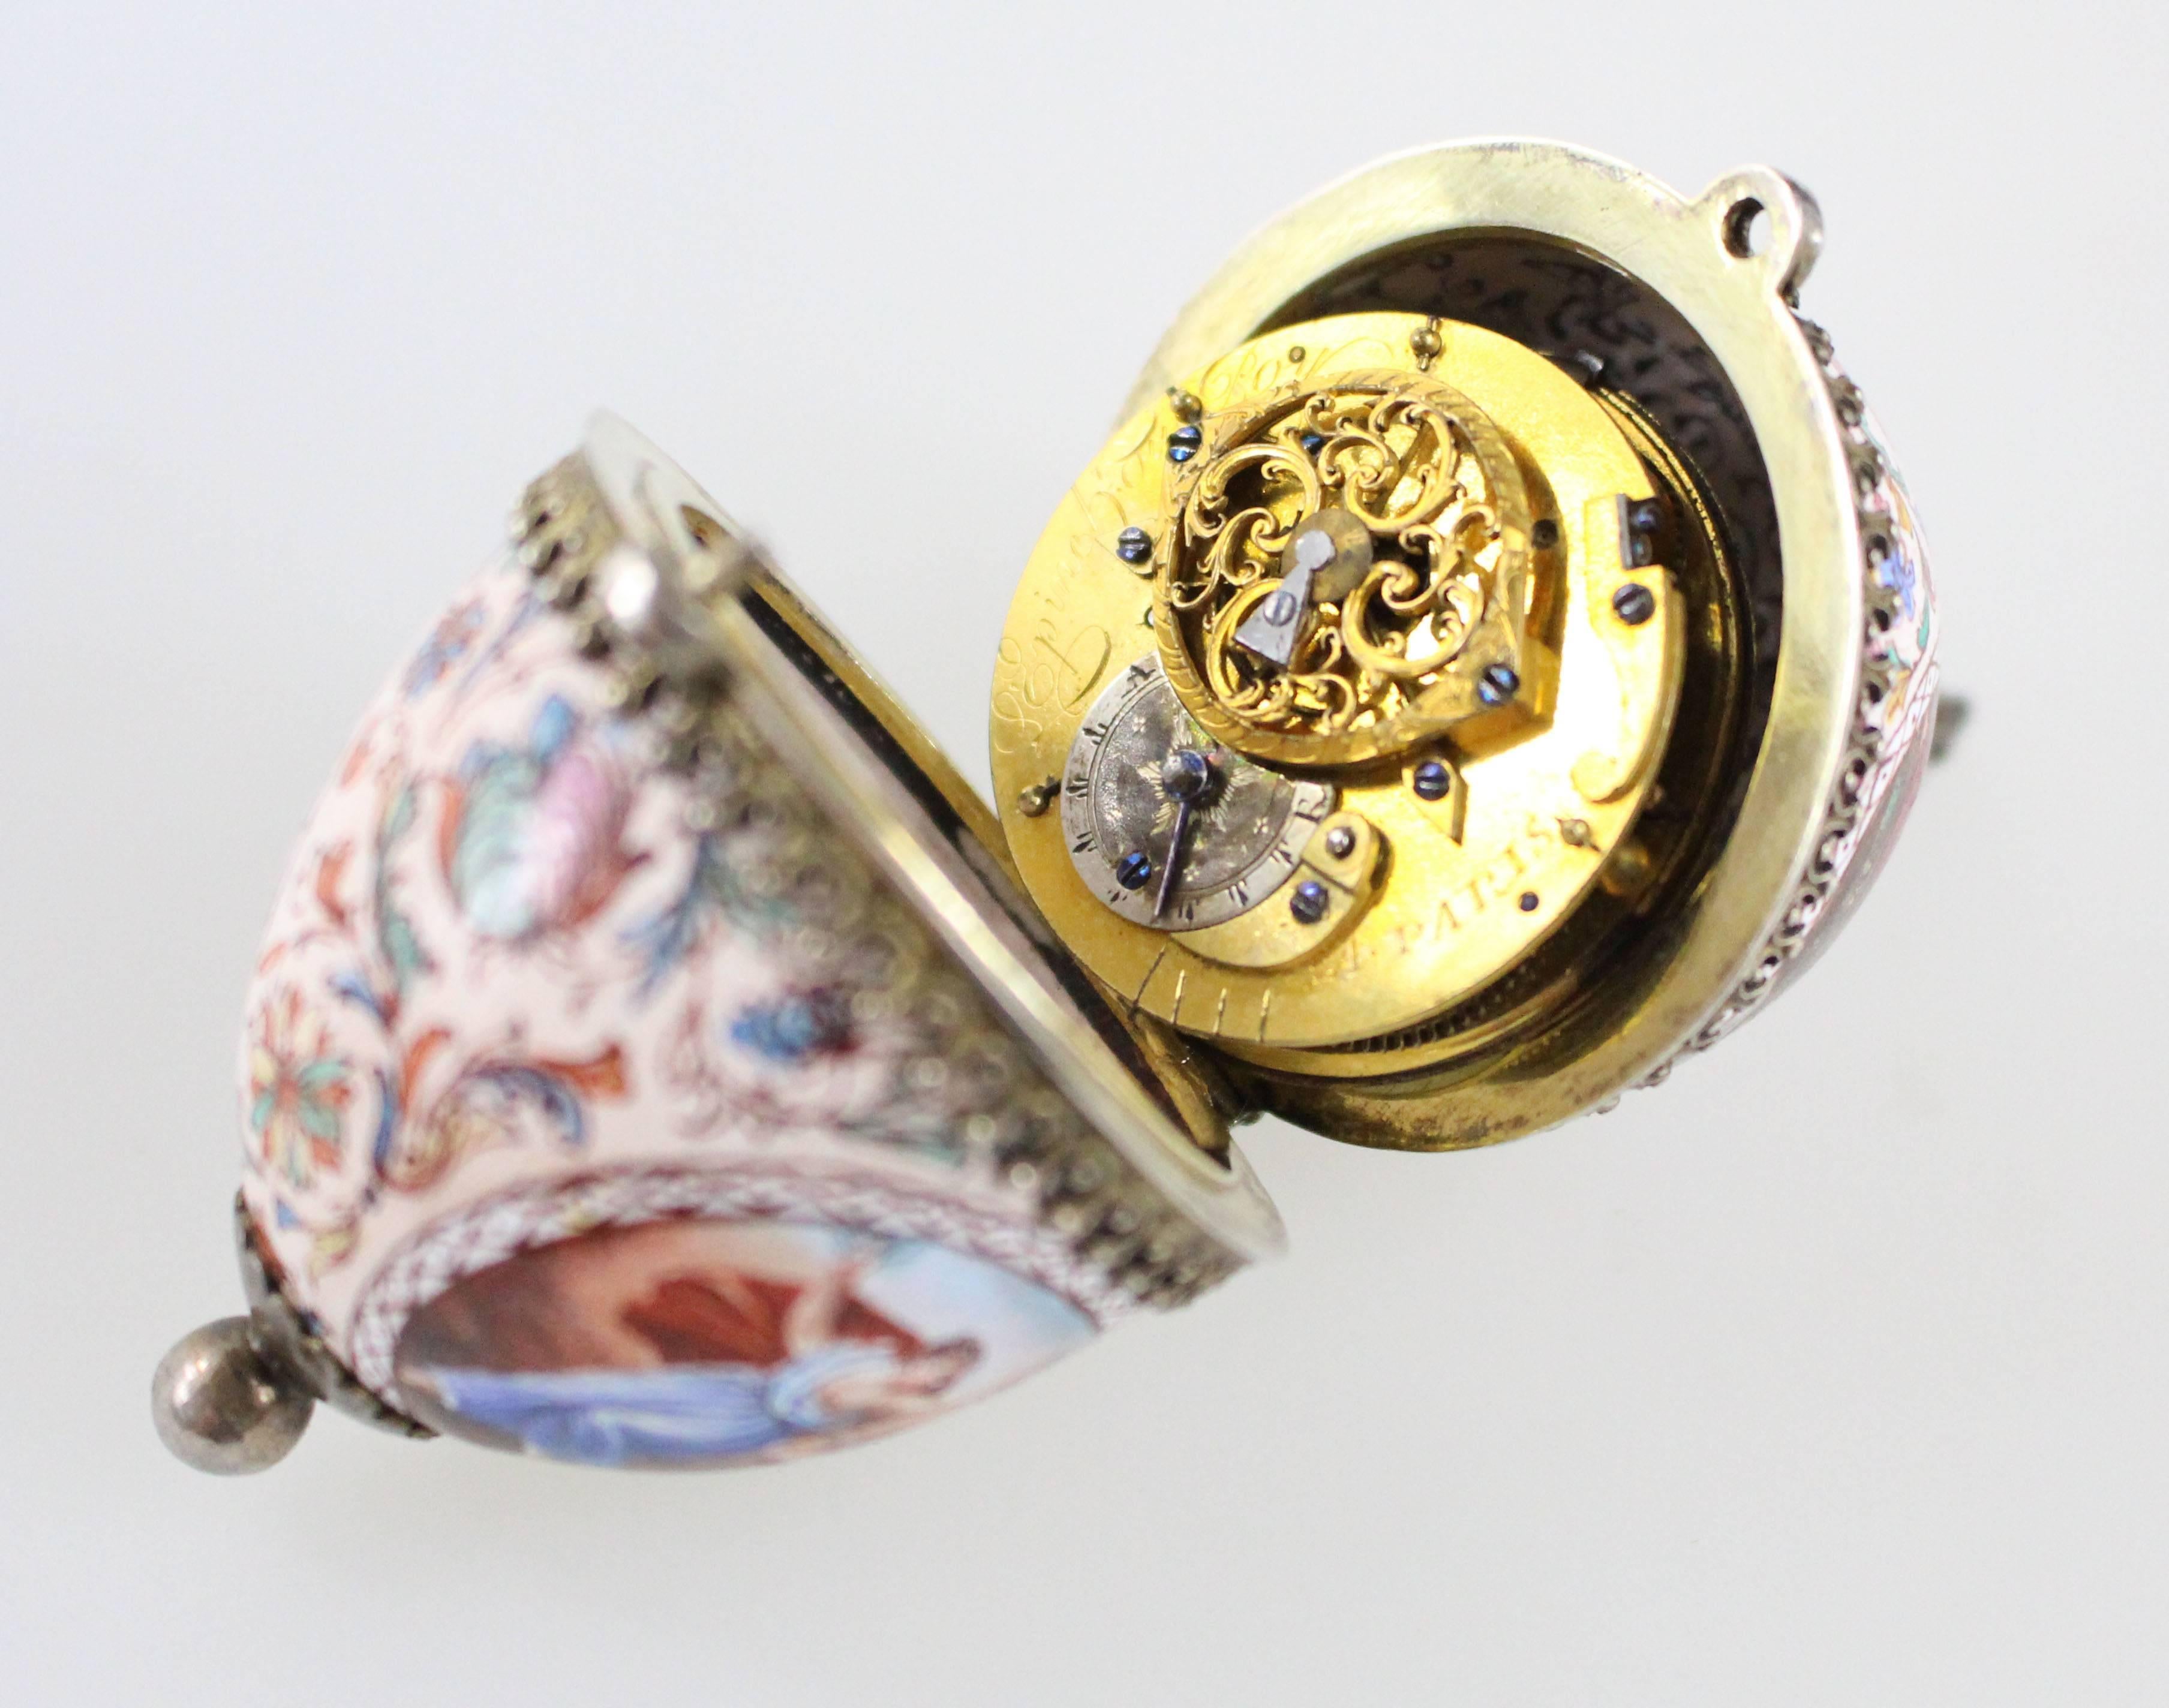 Objet d'art watch in the shape of an egg. It has romantic scenes in enamel on cooper with a gilt brass fusee movement and round baluster pillars. This piece is from the house of Jean Antoine Lepine, and manufactured in the late 18th century. Signed